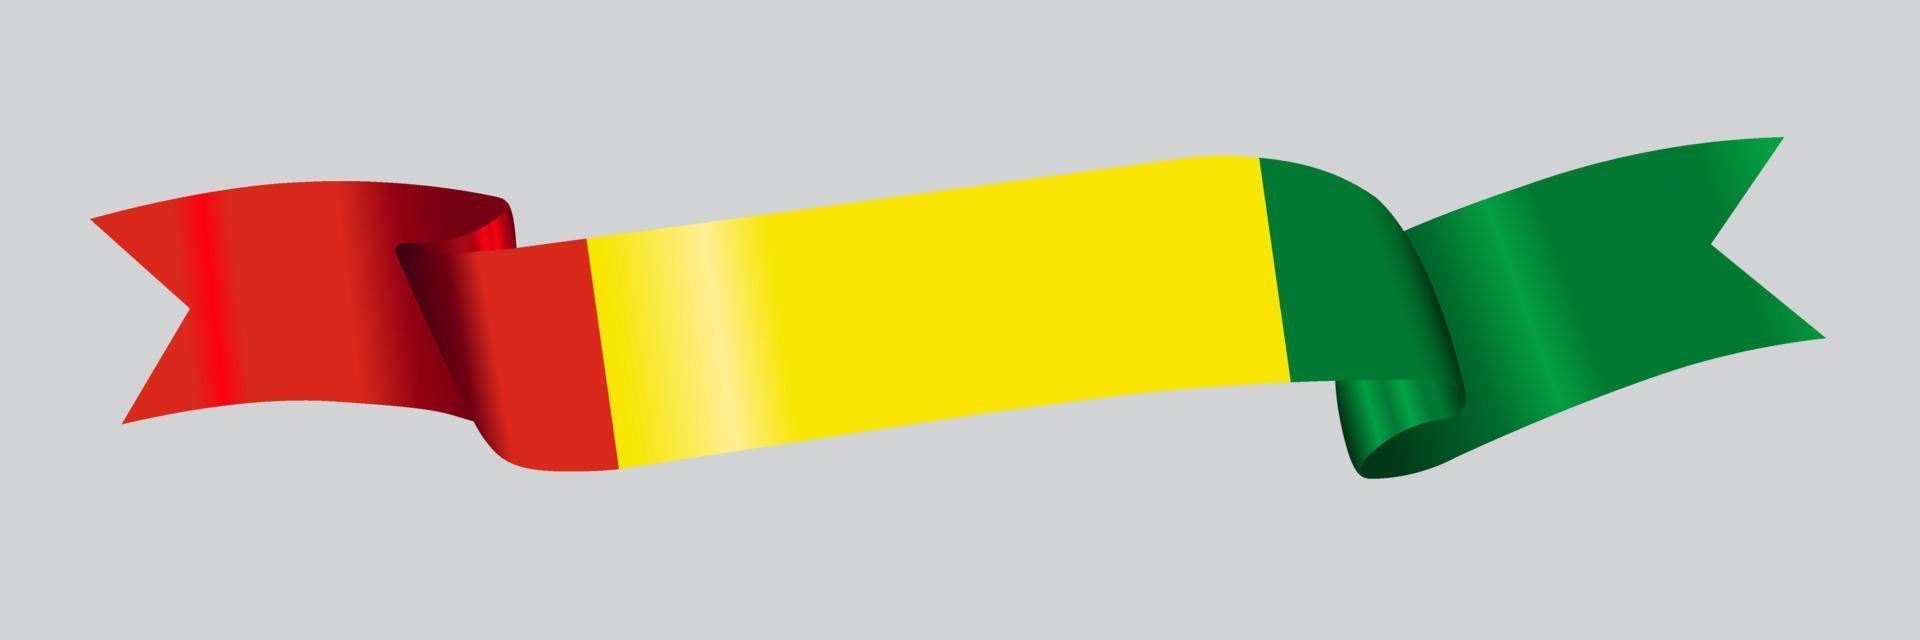 3D Flag of Bolivia on a fabric ribbon. vector